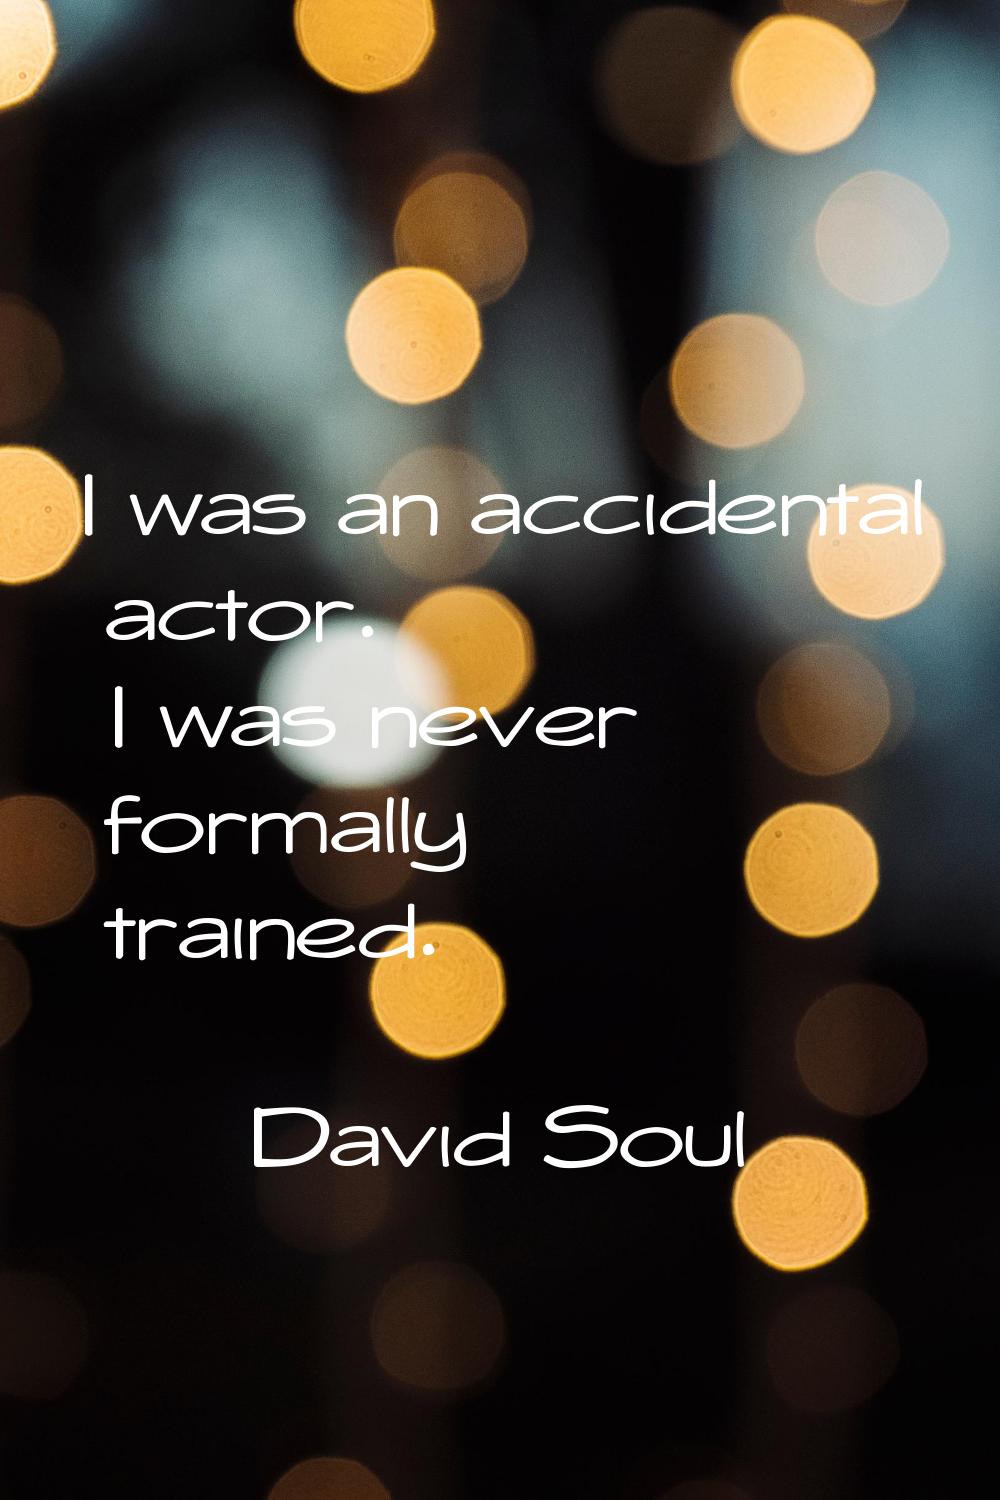 I was an accidental actor. I was never formally trained.